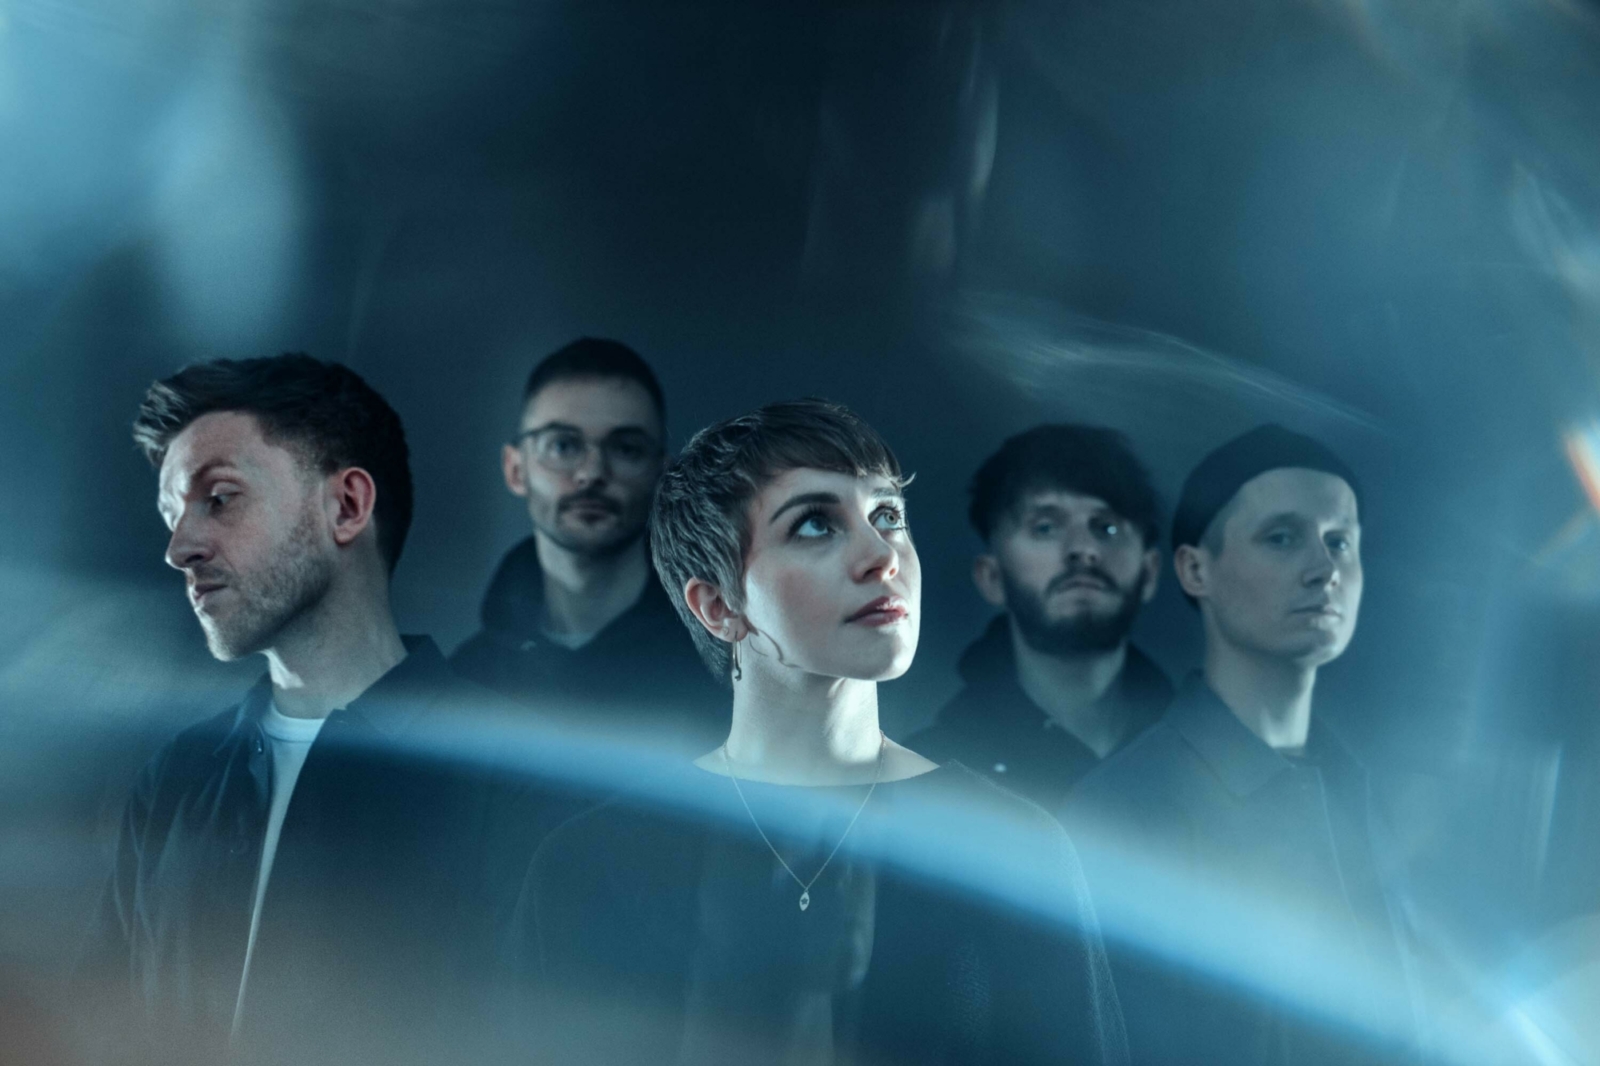 Rolo Tomassi: “We’ve been pushing the extremes further”